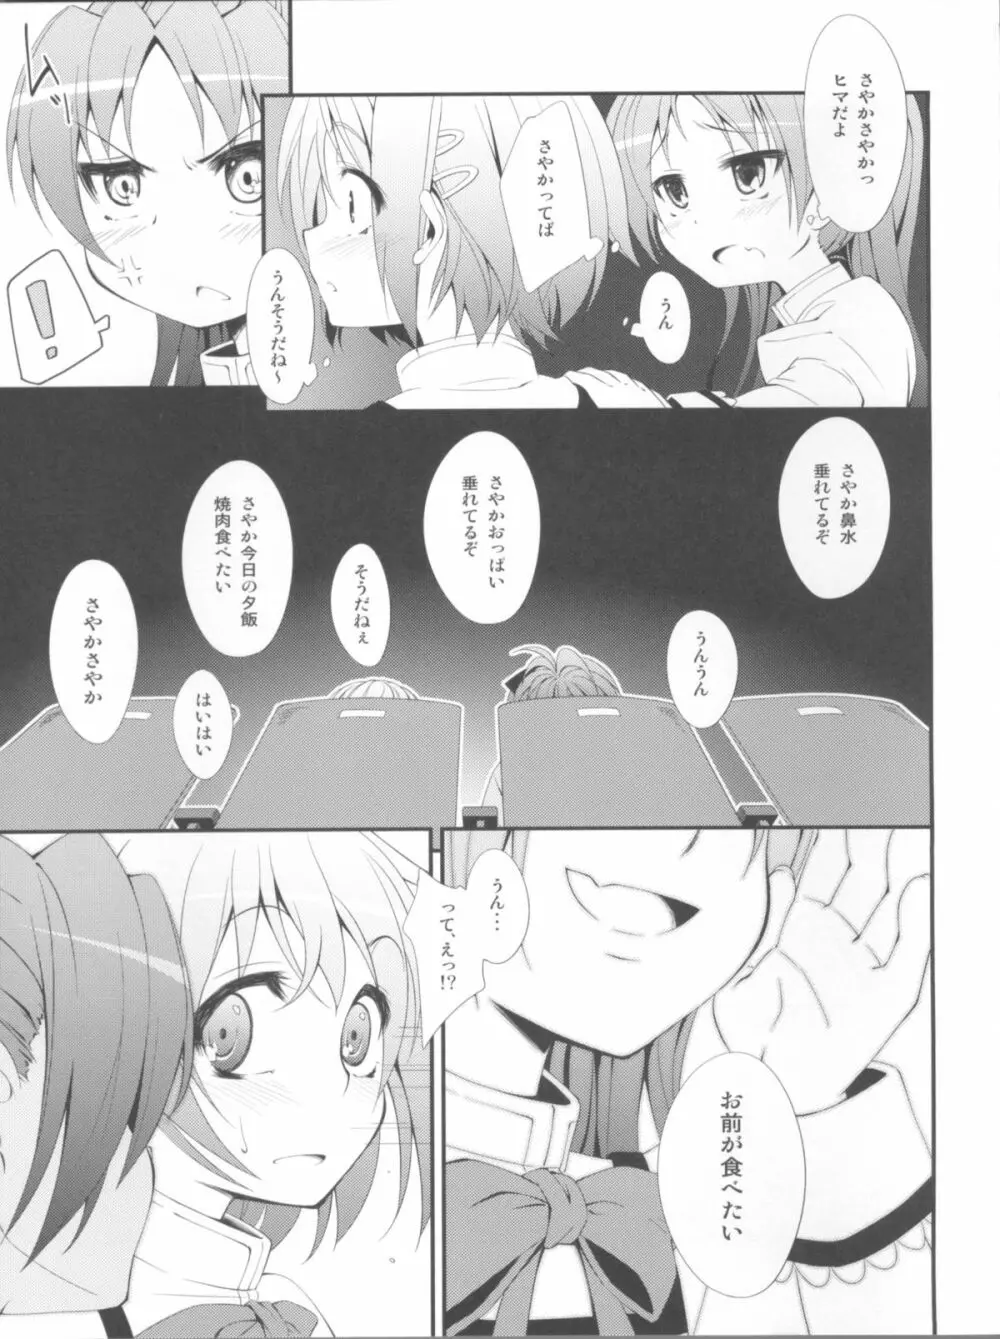 Lovely Girls' Lily vol.2 - page6